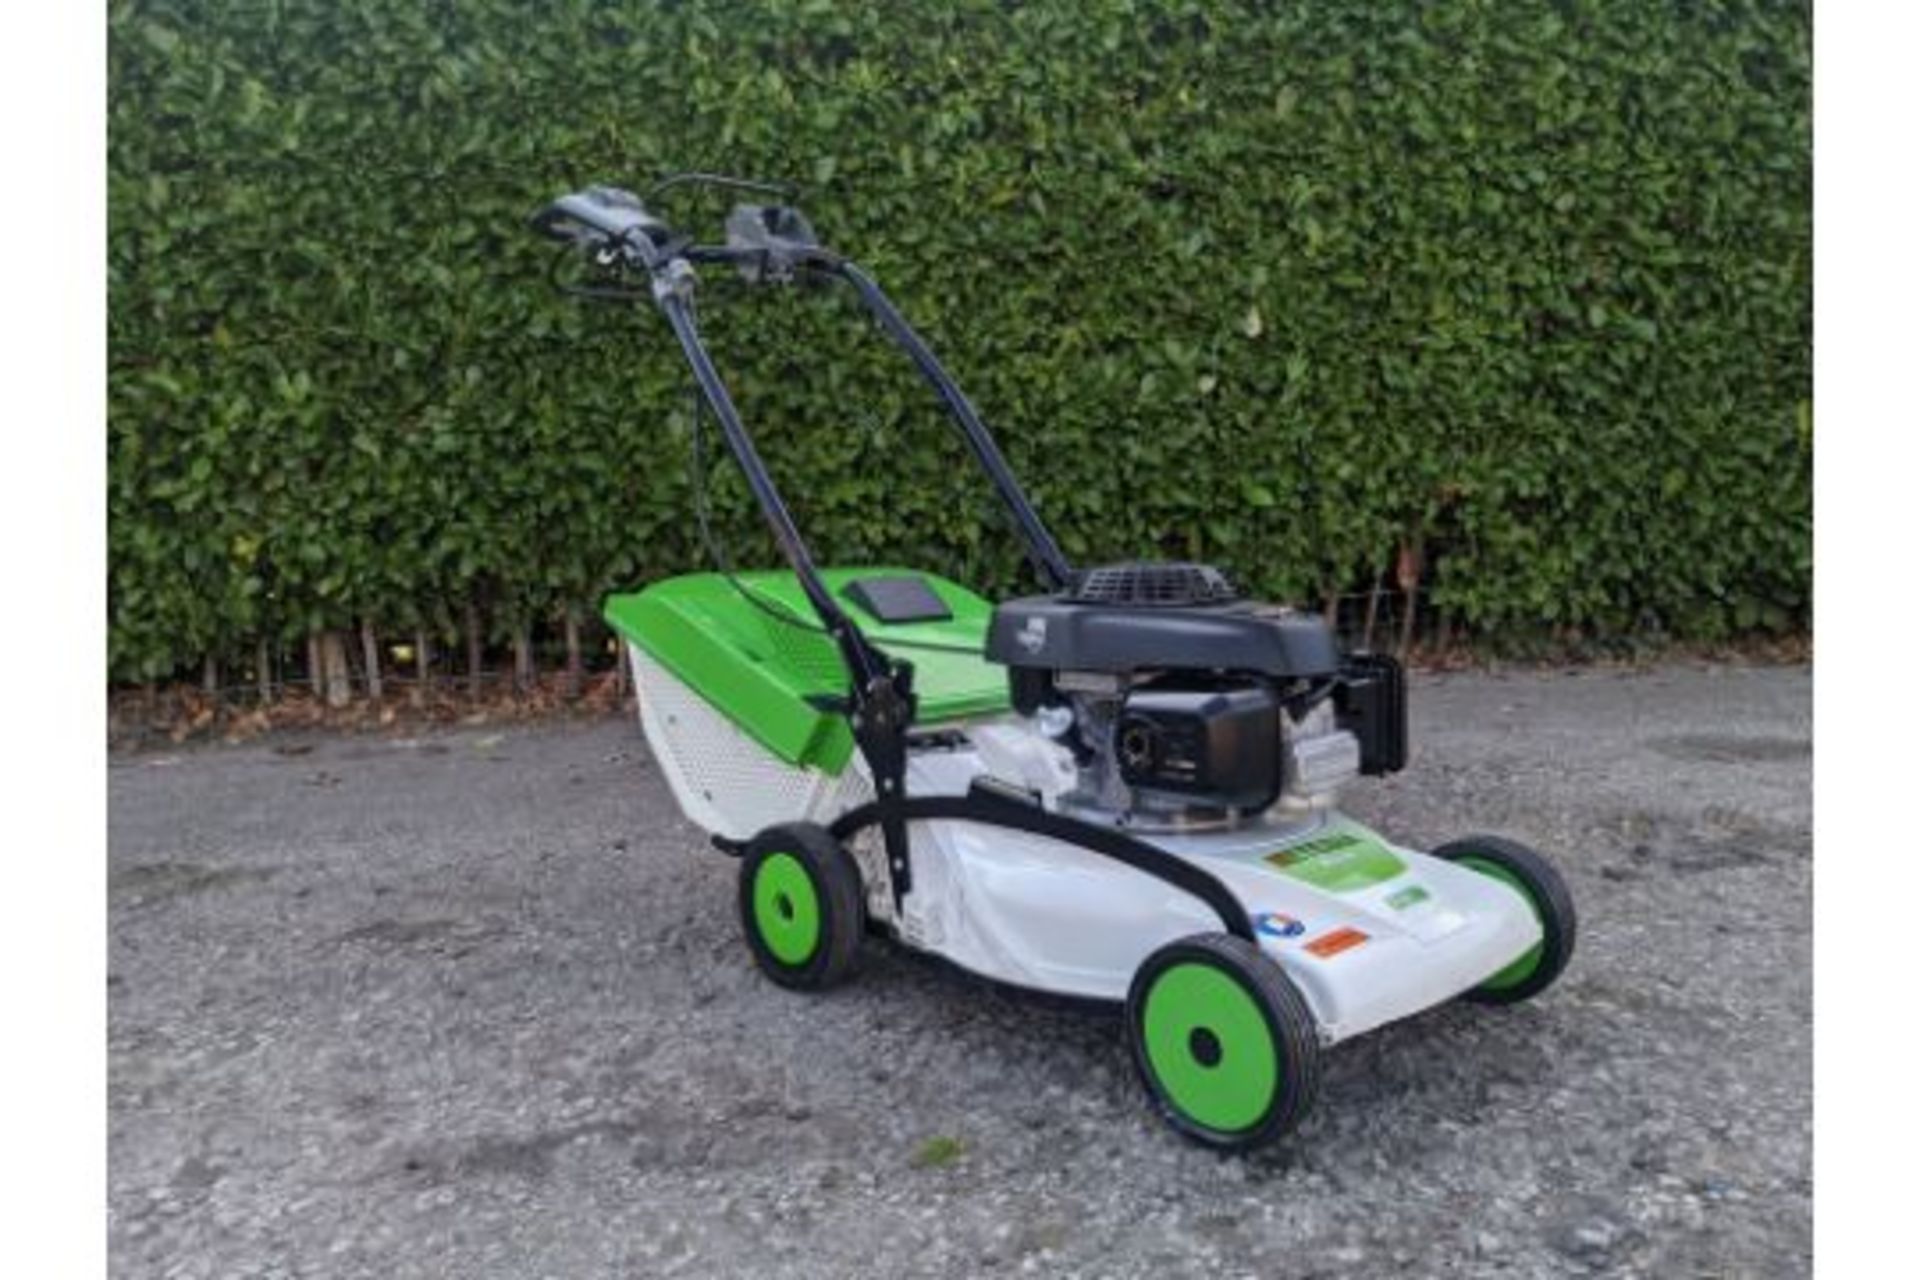 2019 Etesia Pro 46 PHCT 18" Self Propelled Lawn Mower - Image 3 of 5